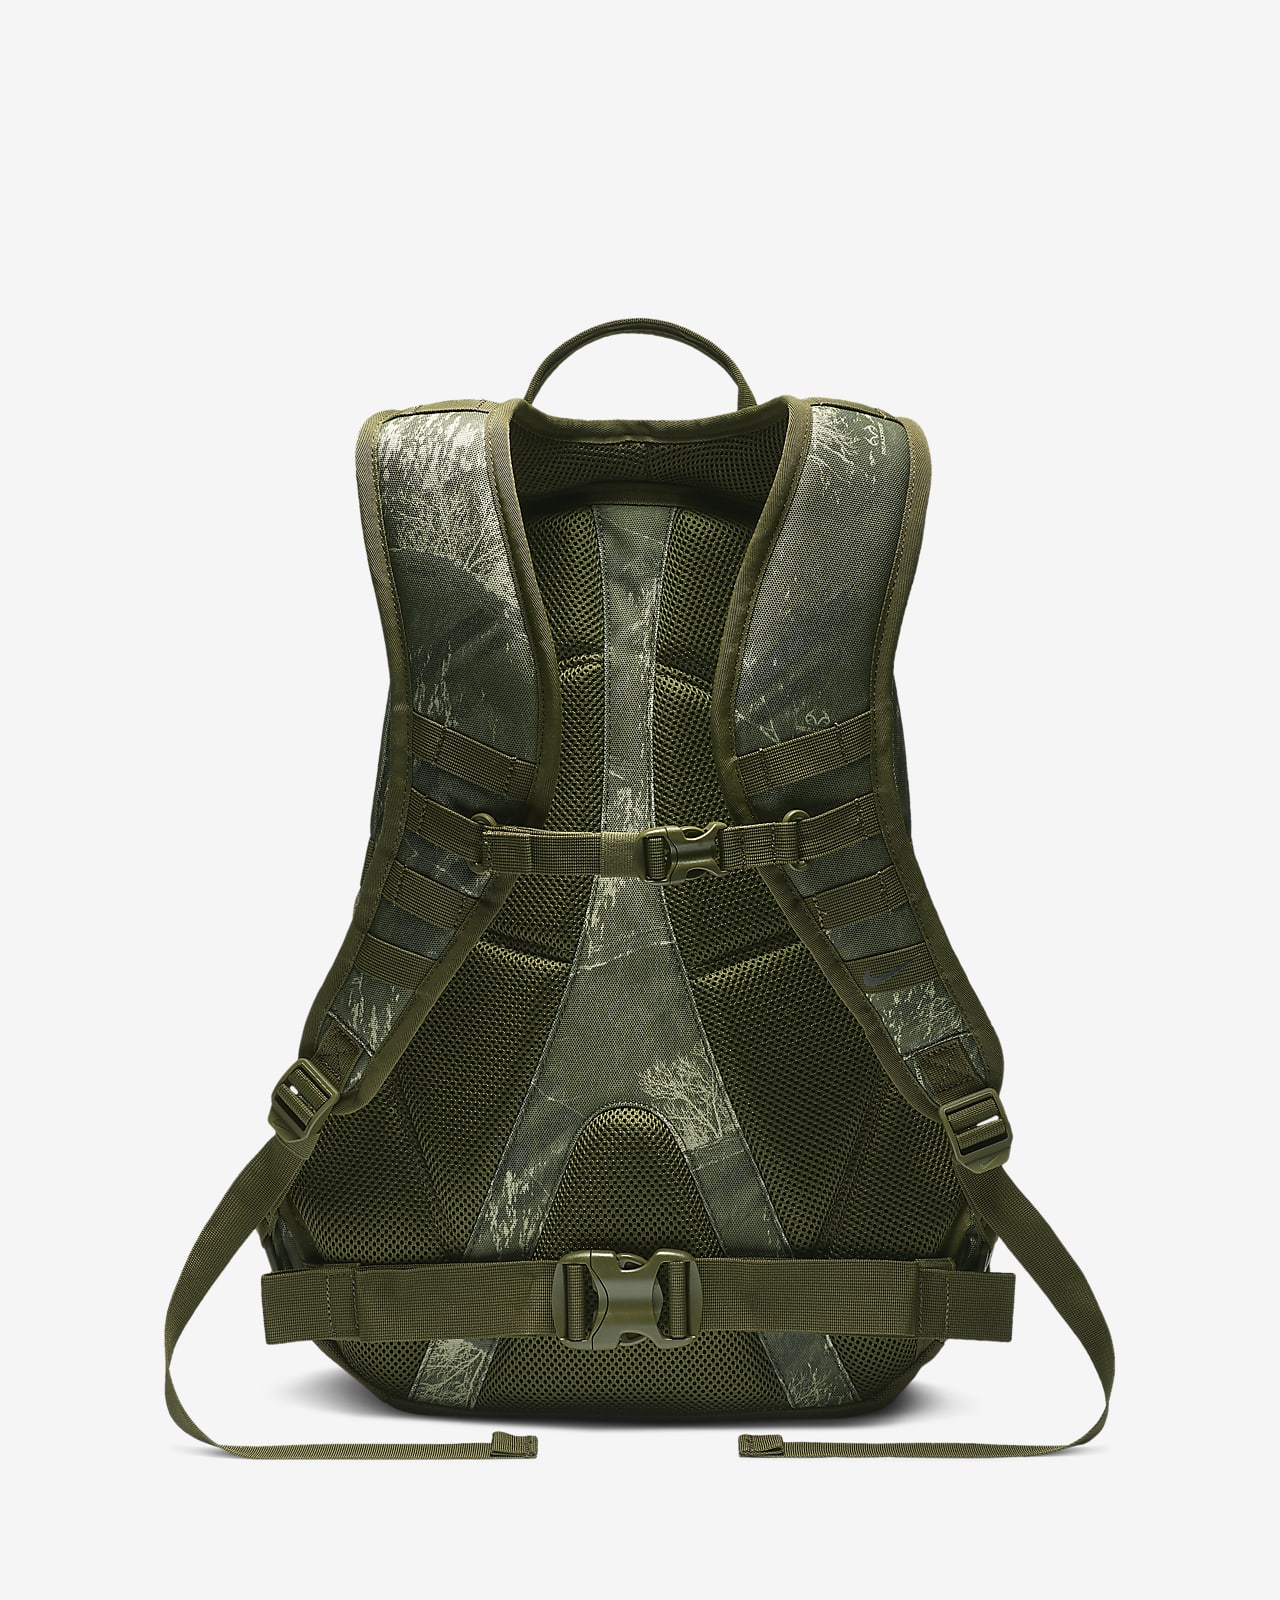 sfs recruit backpack